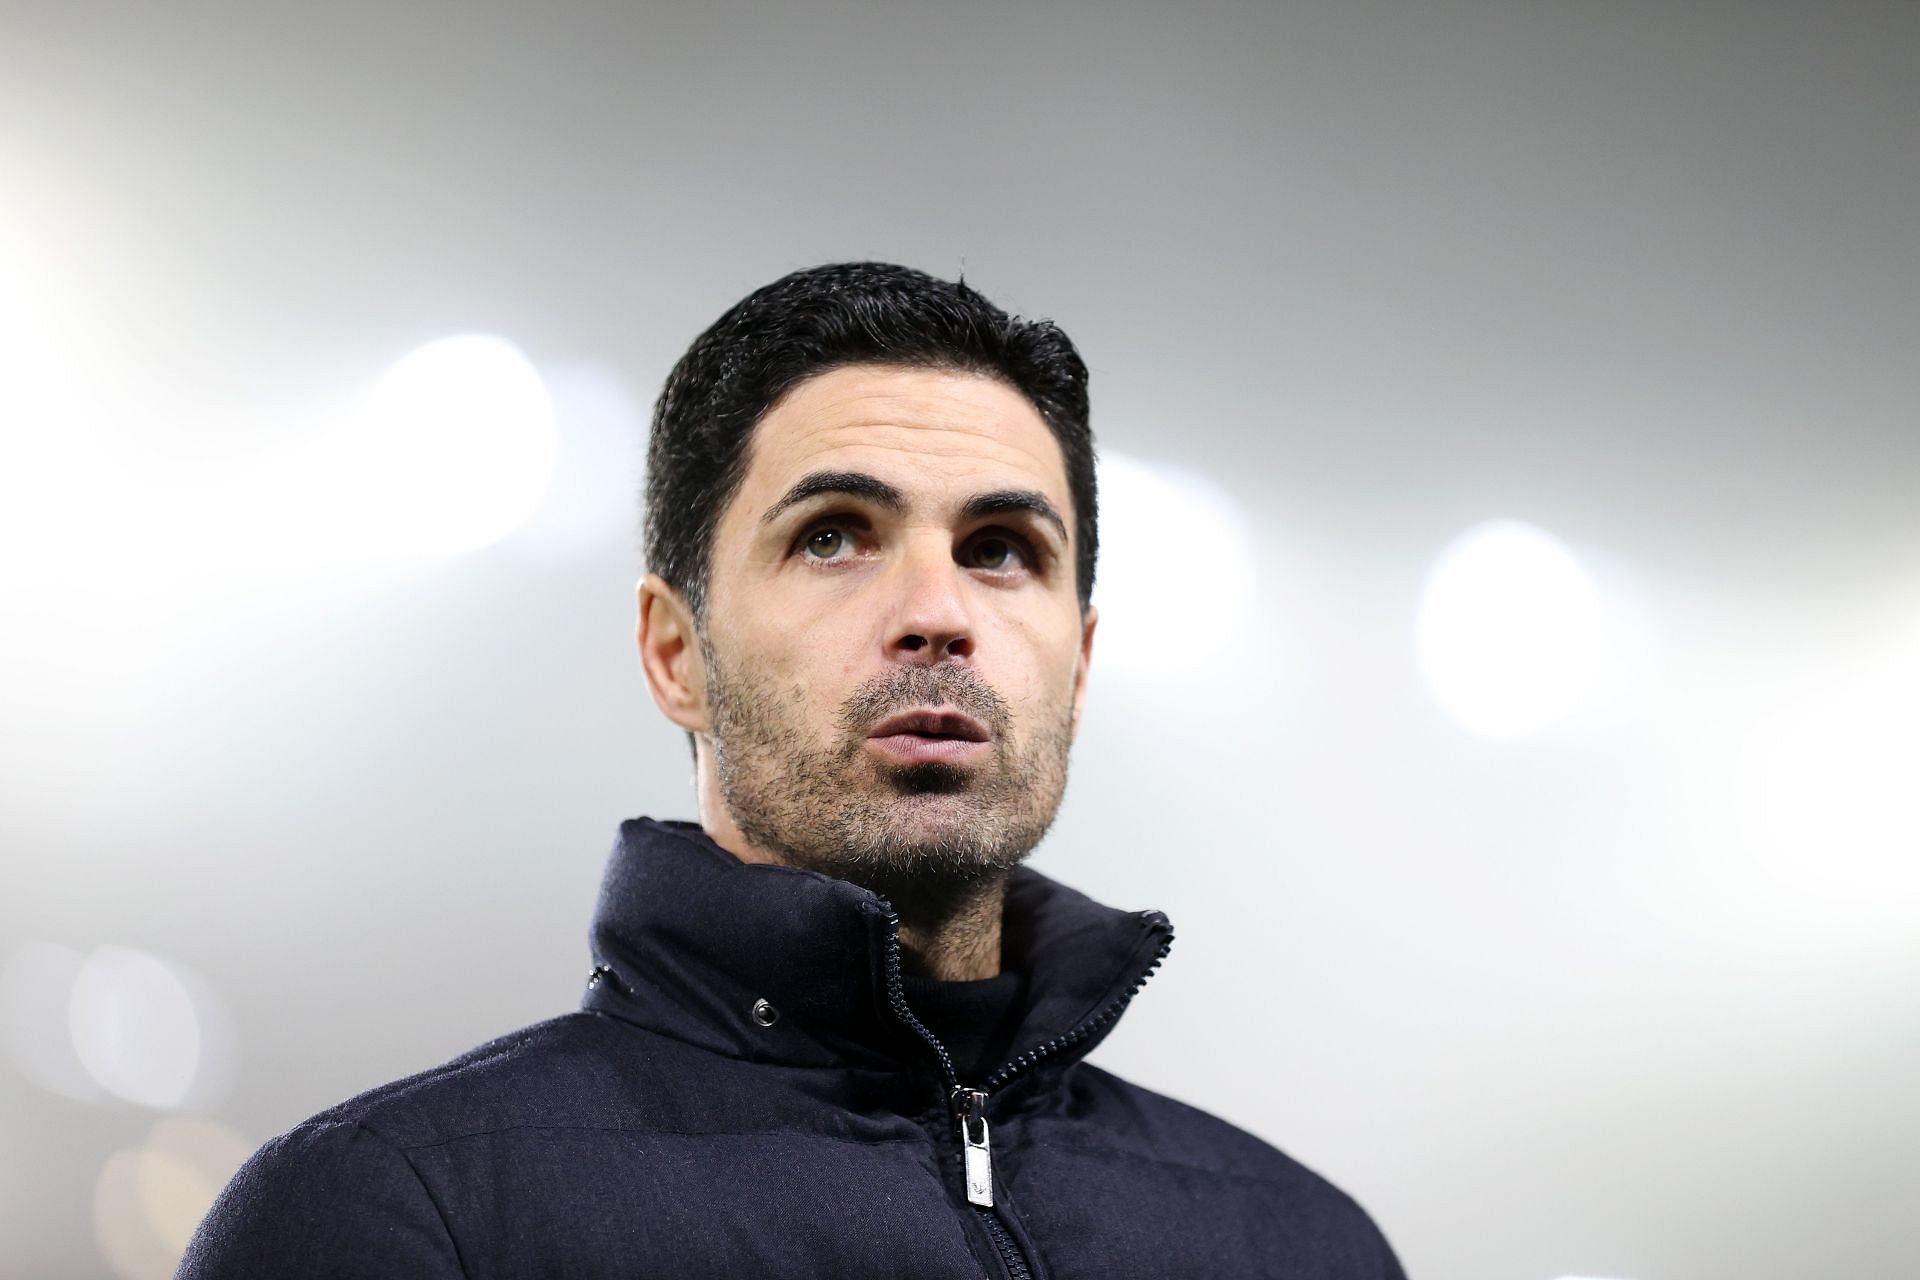 Arsenal manager Mikel Arteta is fighting for a top-four finish this season.